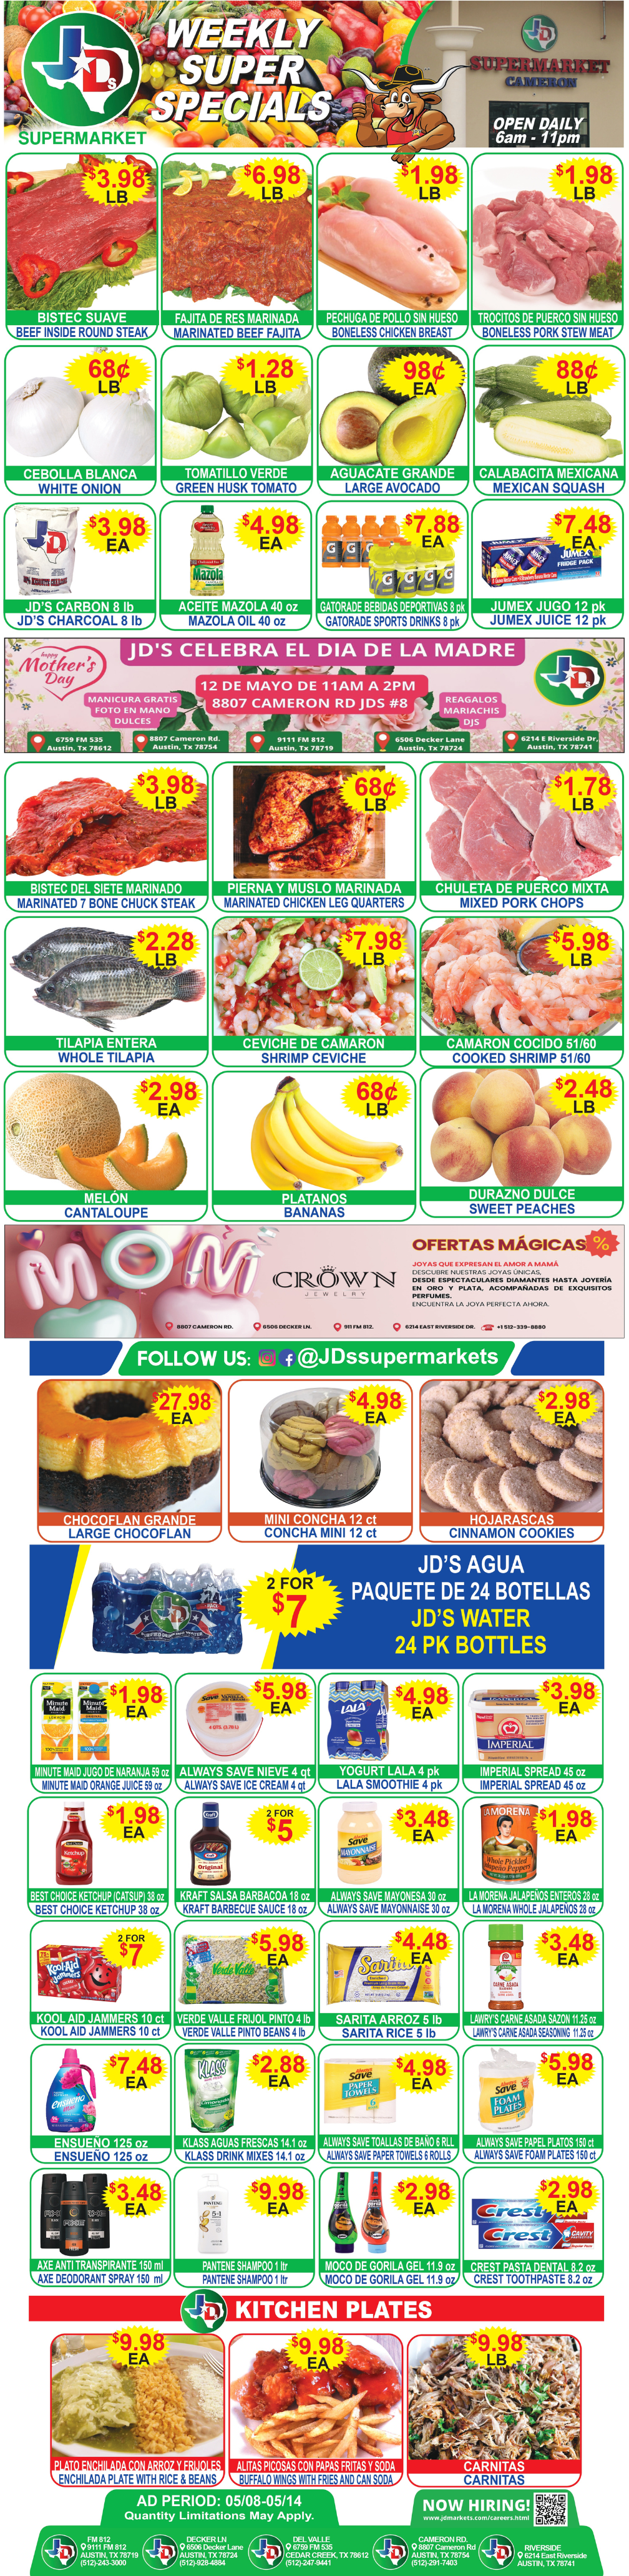 JD's Supermarkets Instore Ad - Page 1